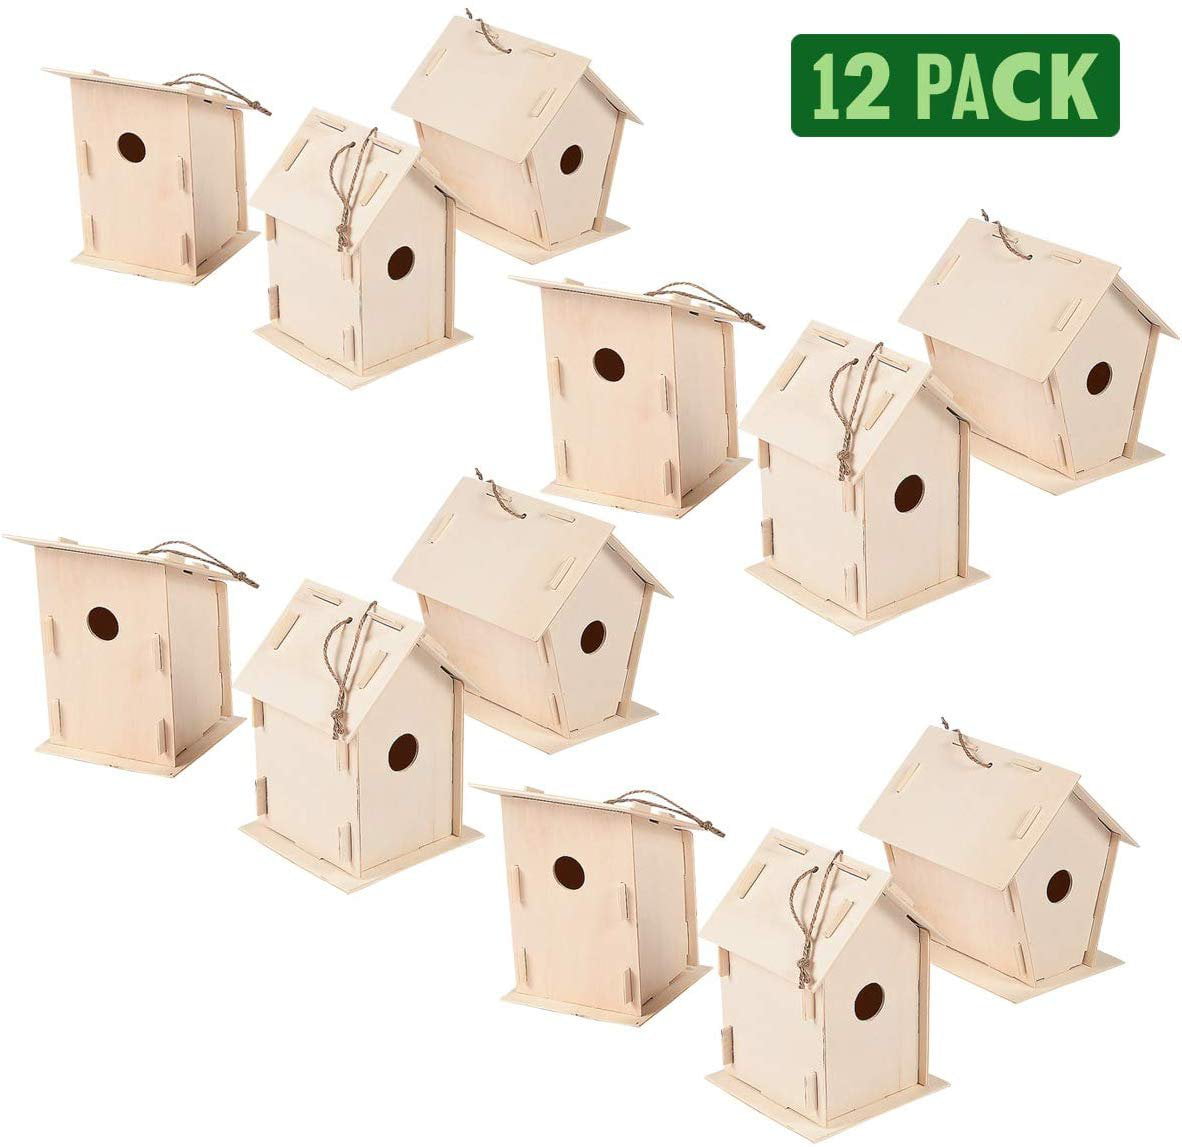 12 Pack Do-It-Yourself Activities School and Home Decor Projects Kicko DIY Unfinished Wooden Birdhouse for Arts and Crafts Party Favors